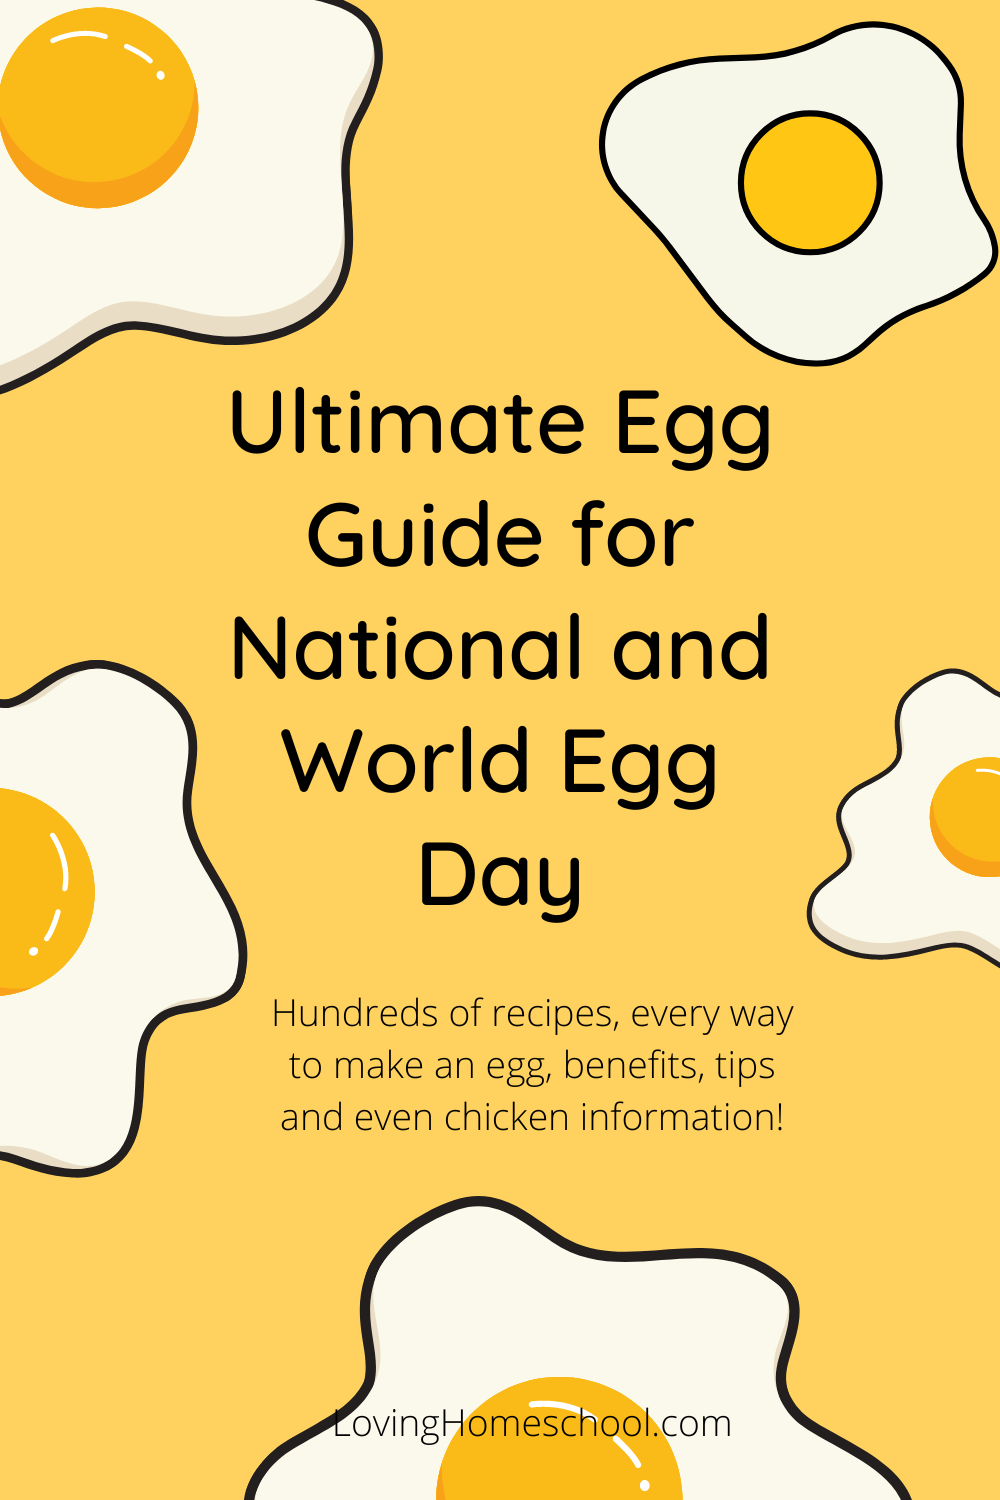 Ultimate Egg Guide for National and World Egg Day